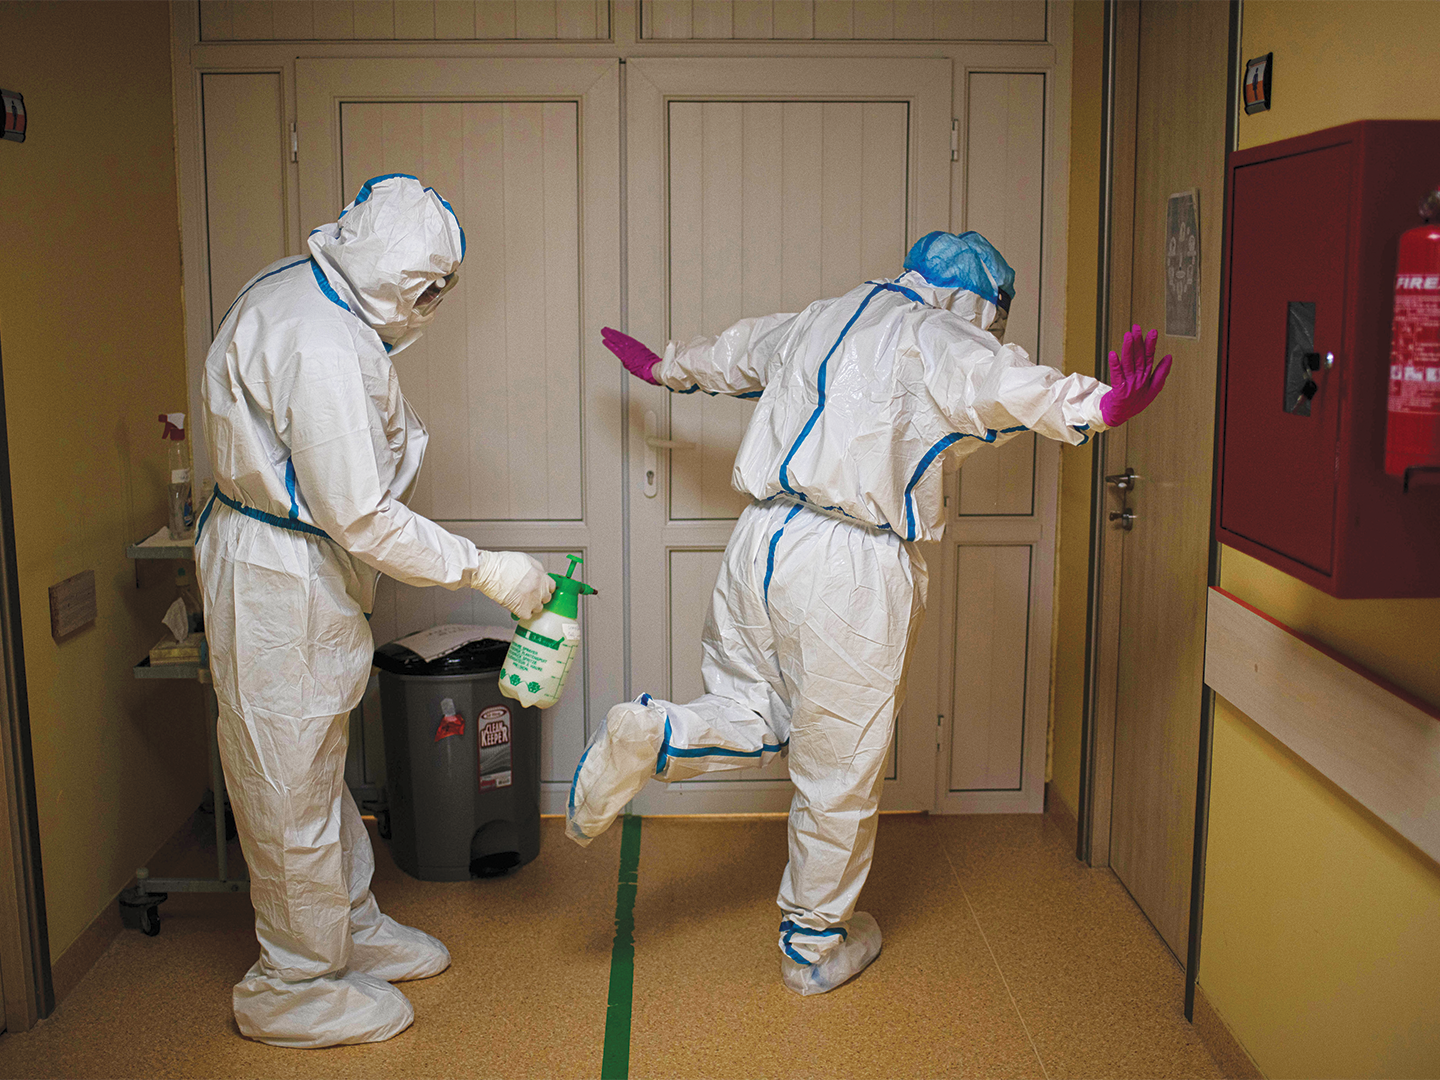 Medical staff routinely disinfect each other.